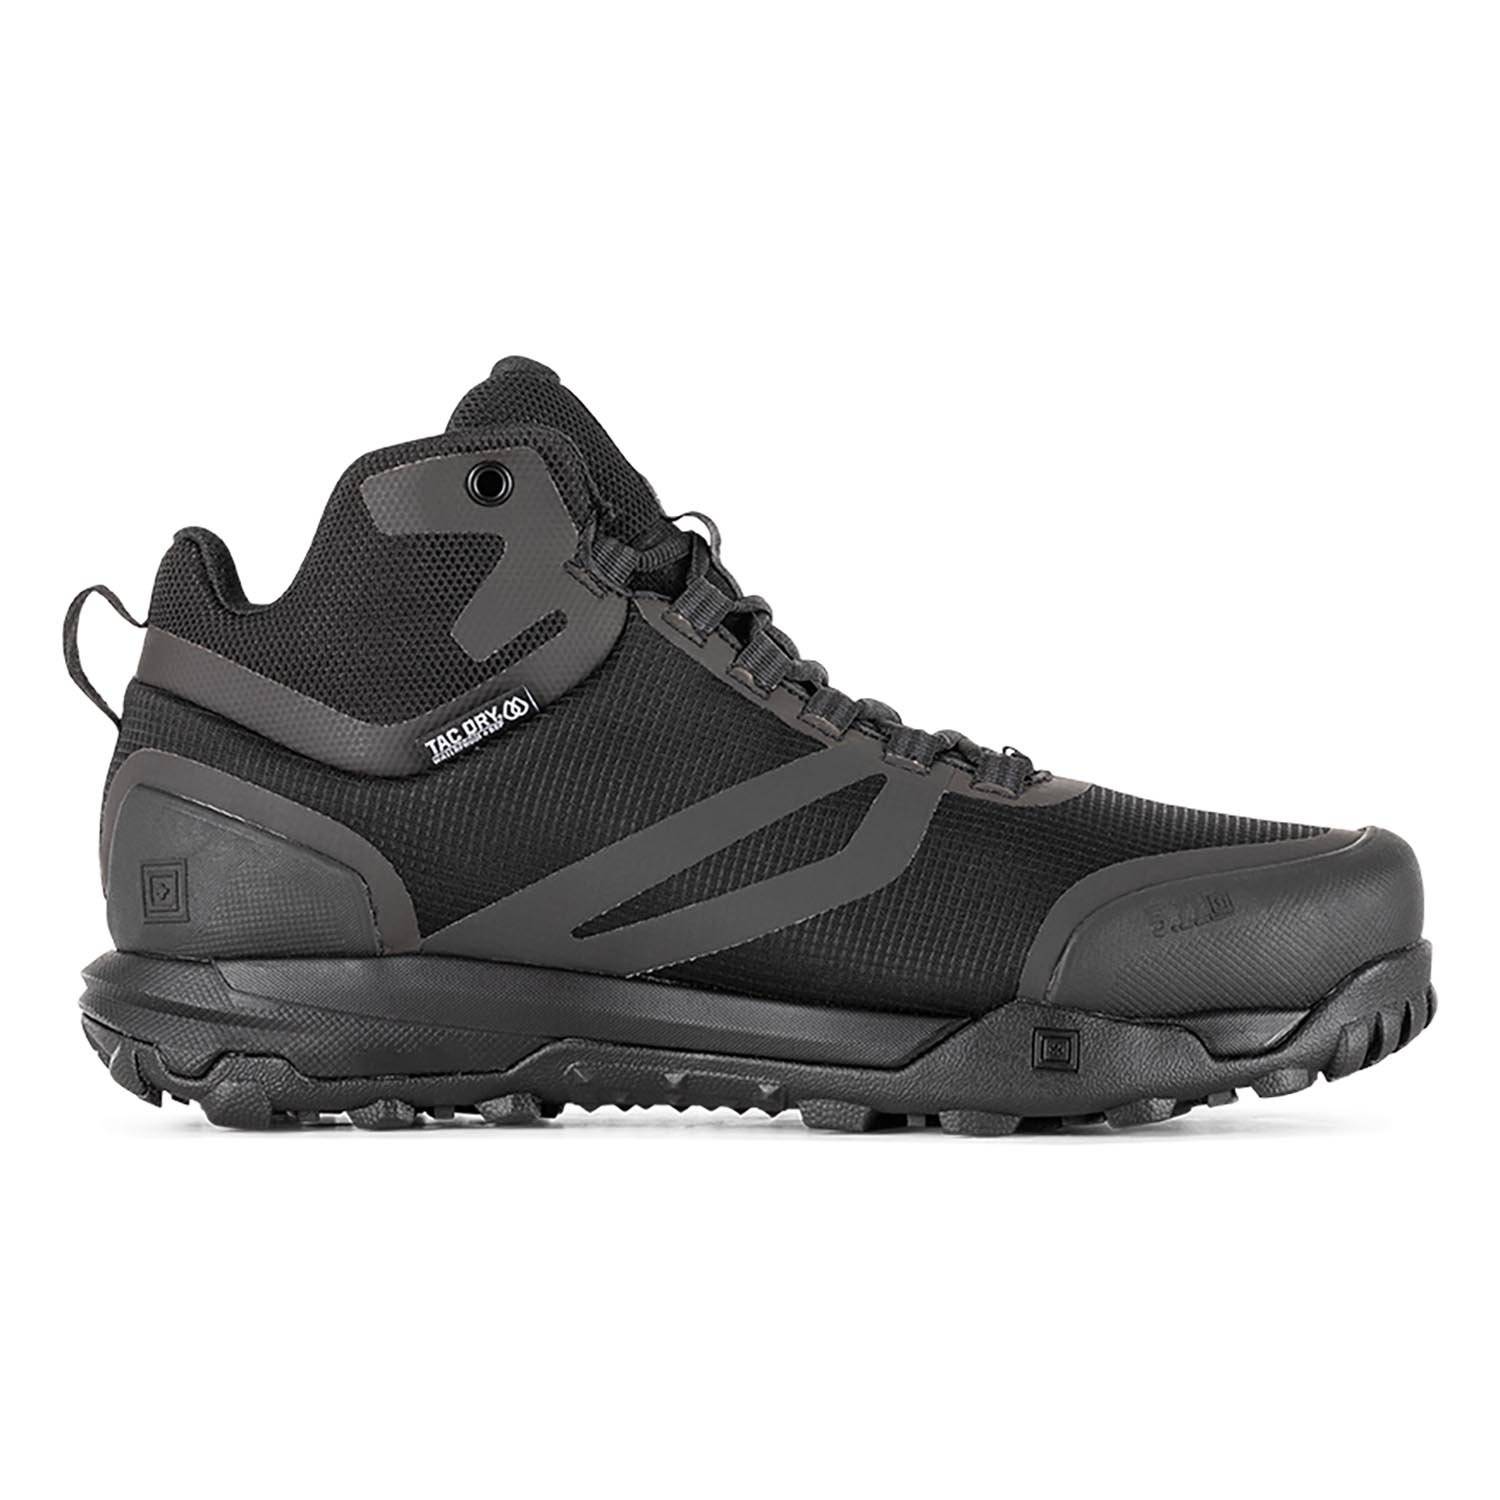 5.11 TACTICAL A/T MID WATERPROOF BOOTS